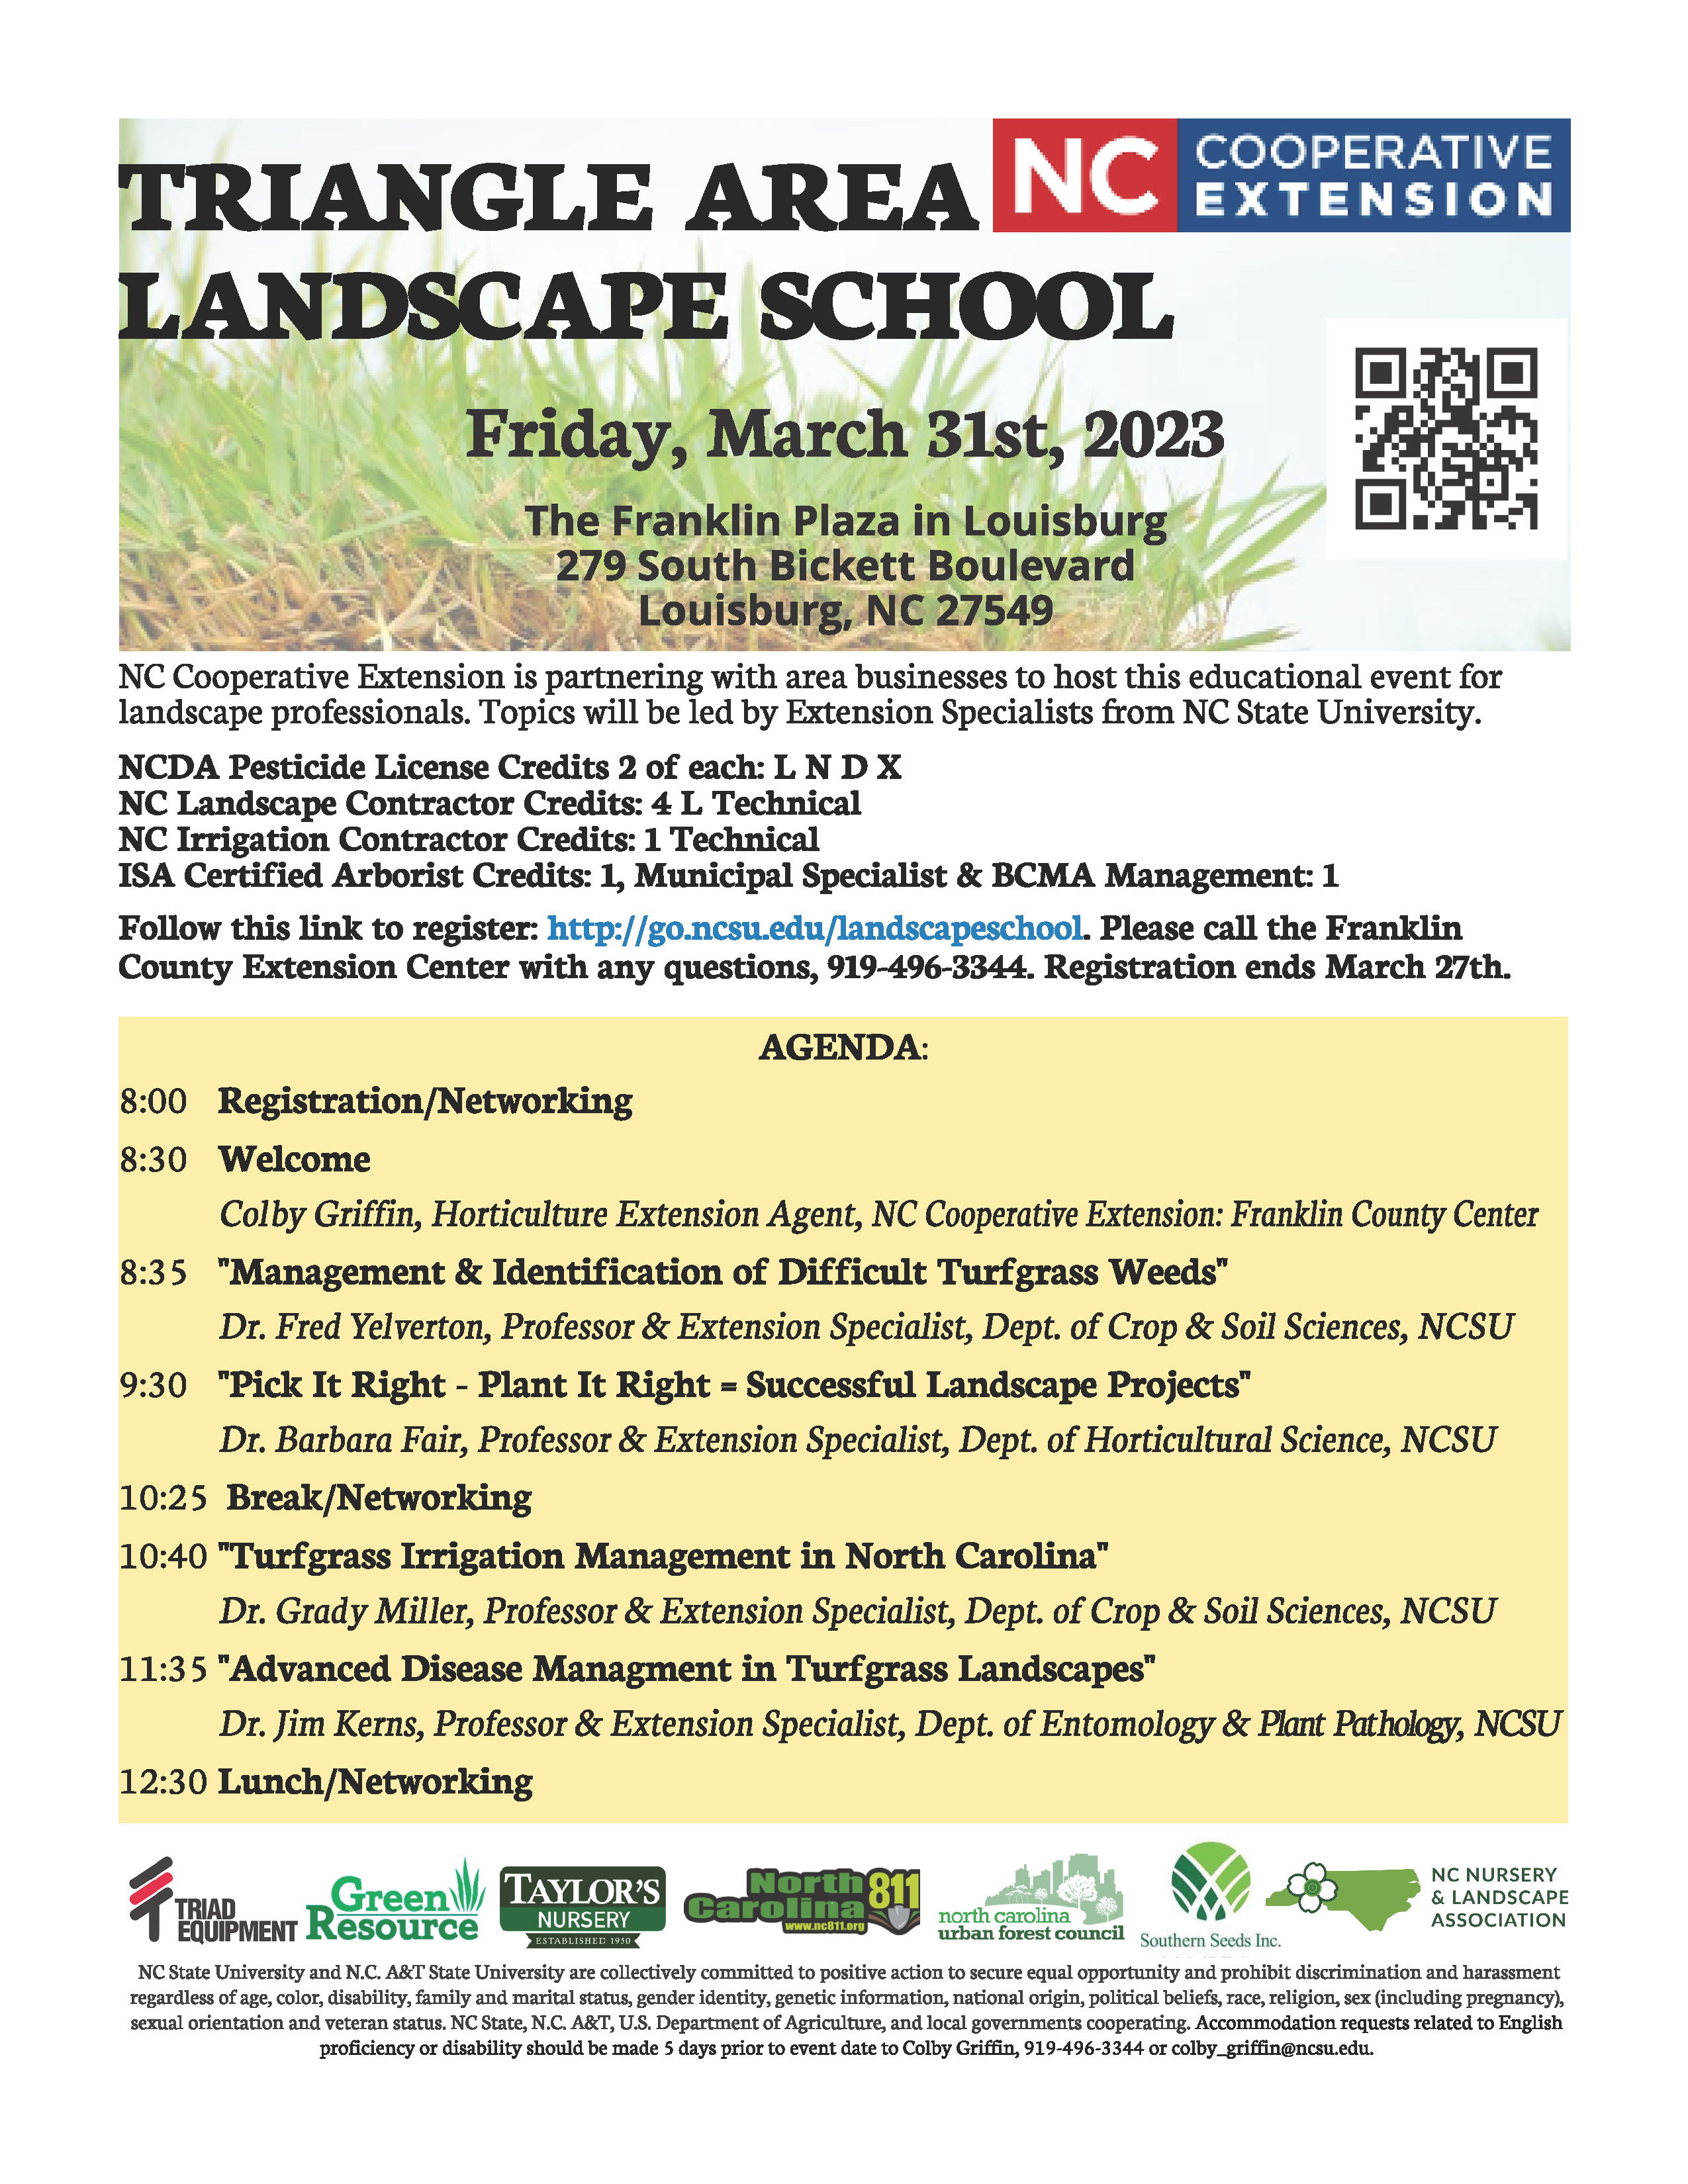 Triangle Area Landscape School flyer, registration info., dates, time and location grass background heading